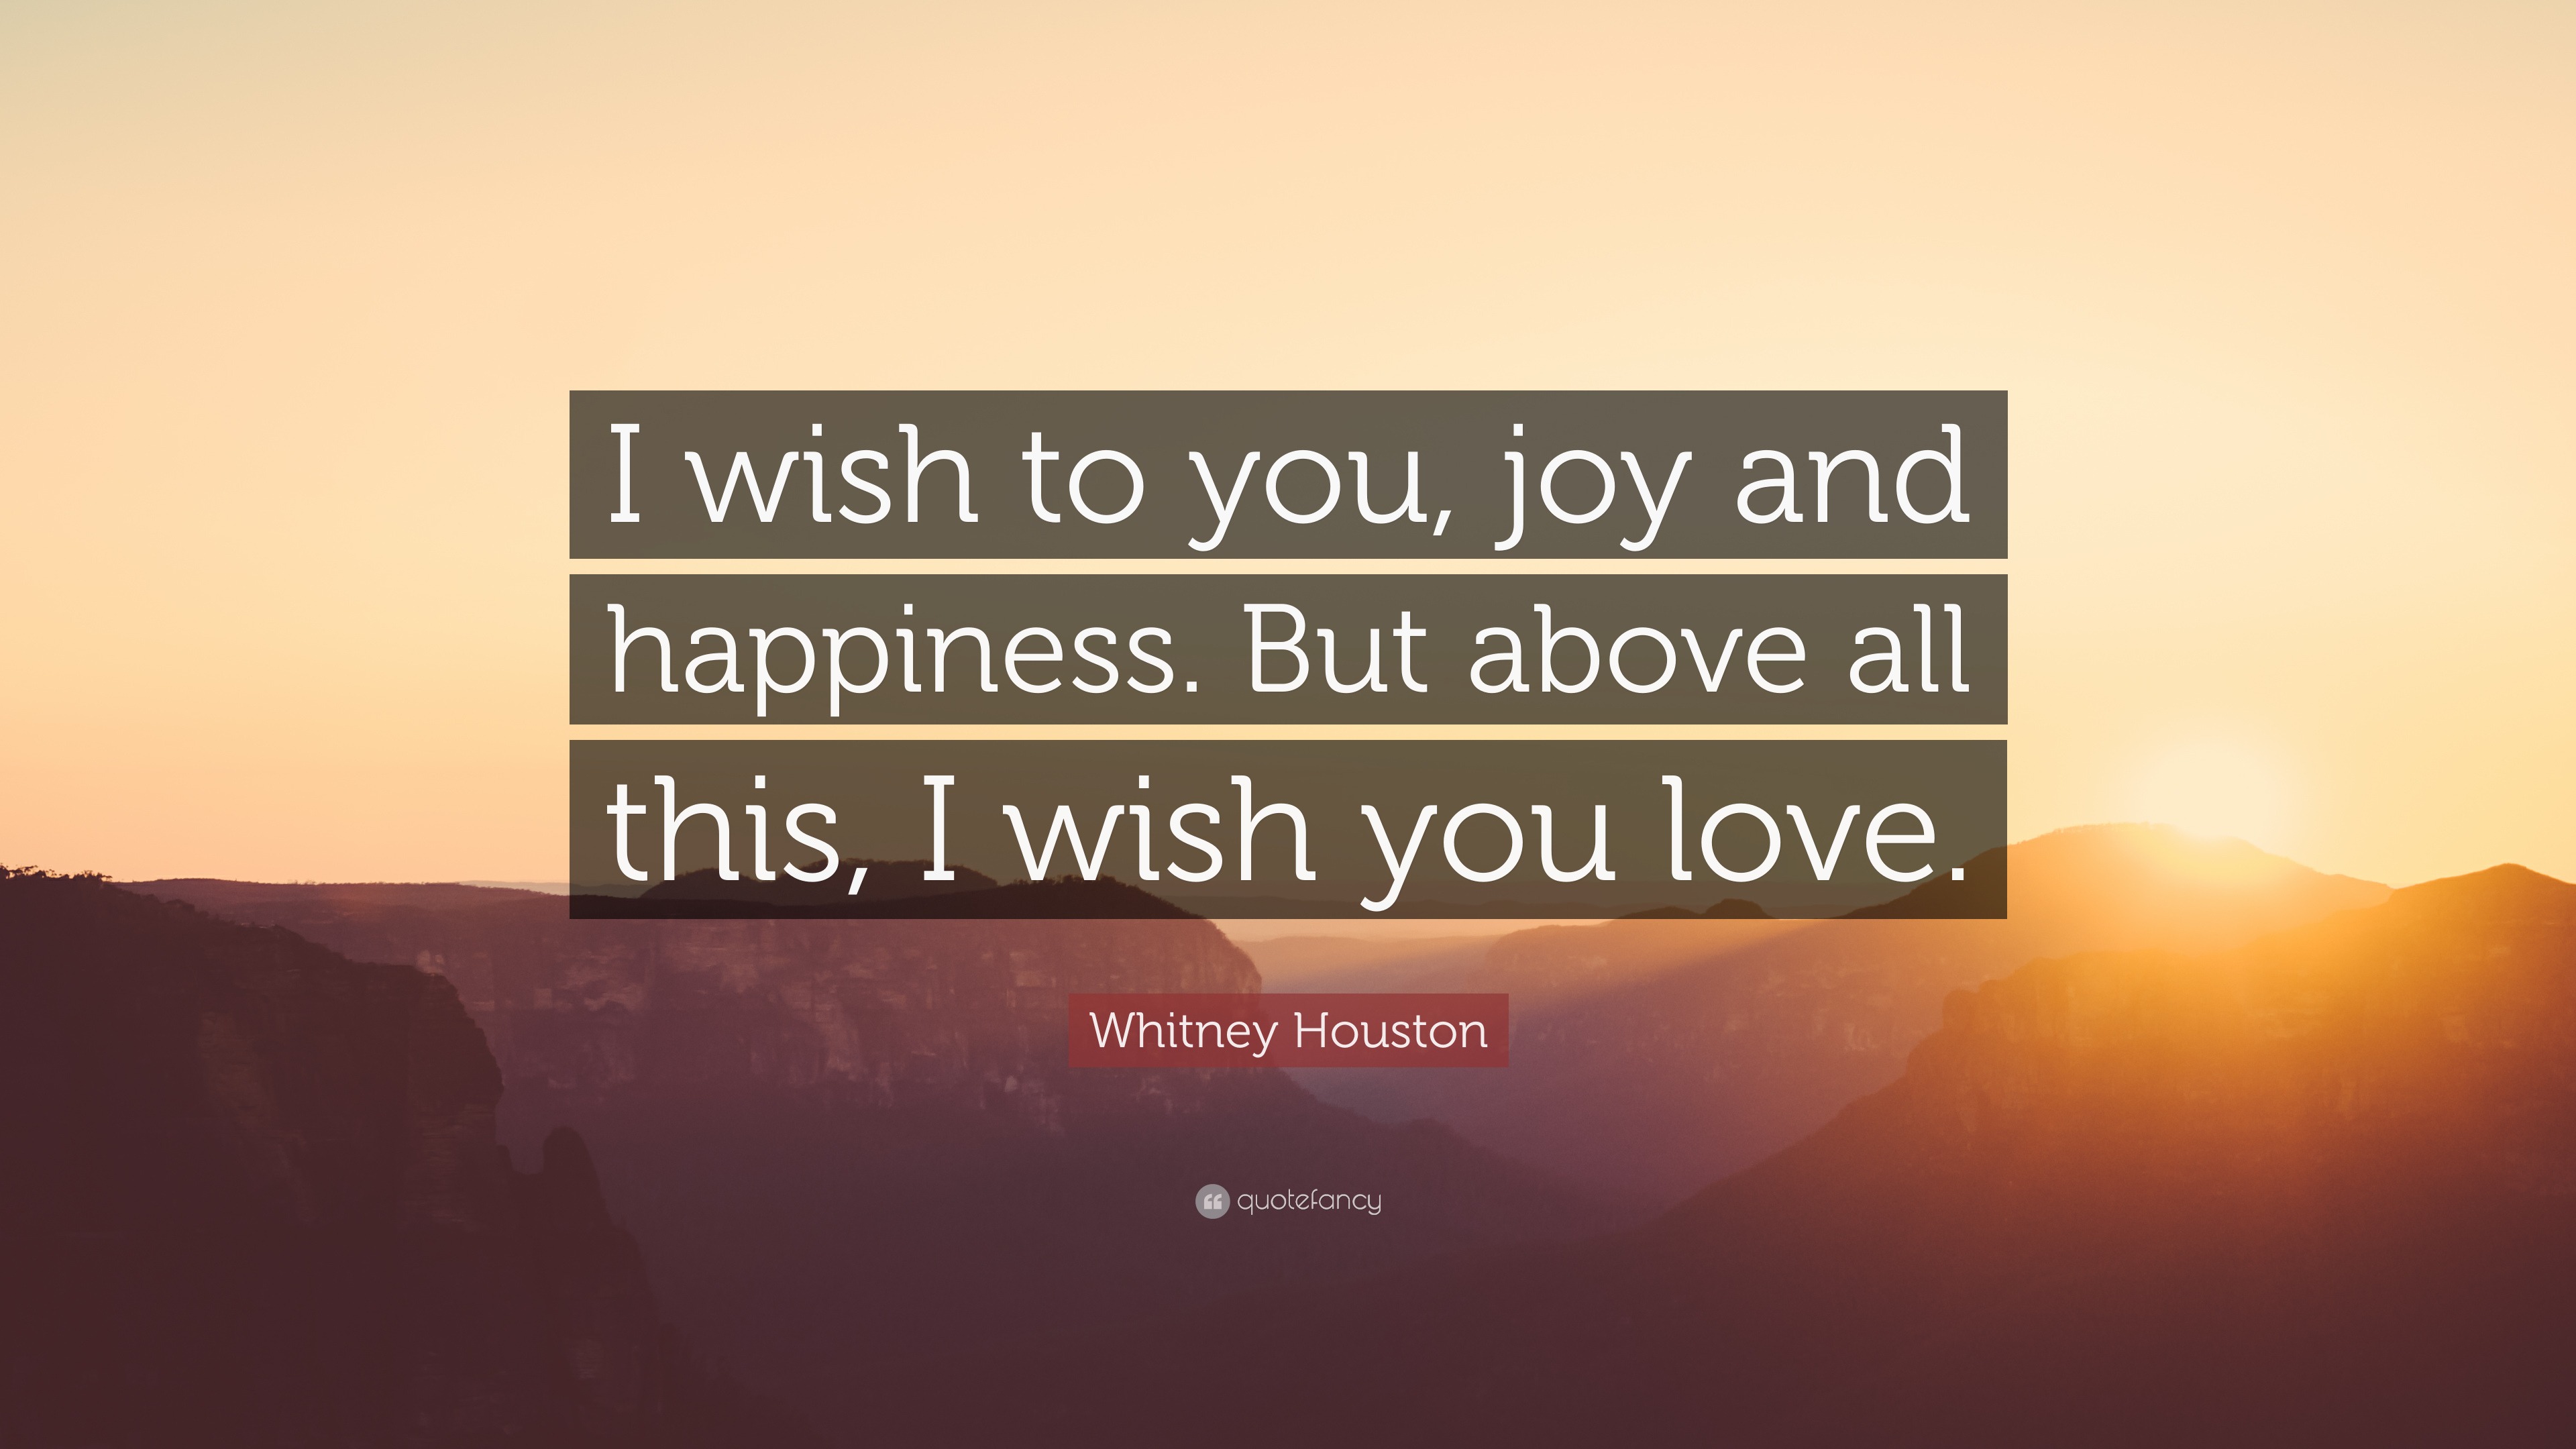 Whitney Houston Quote “I wish to you joy and happiness But above